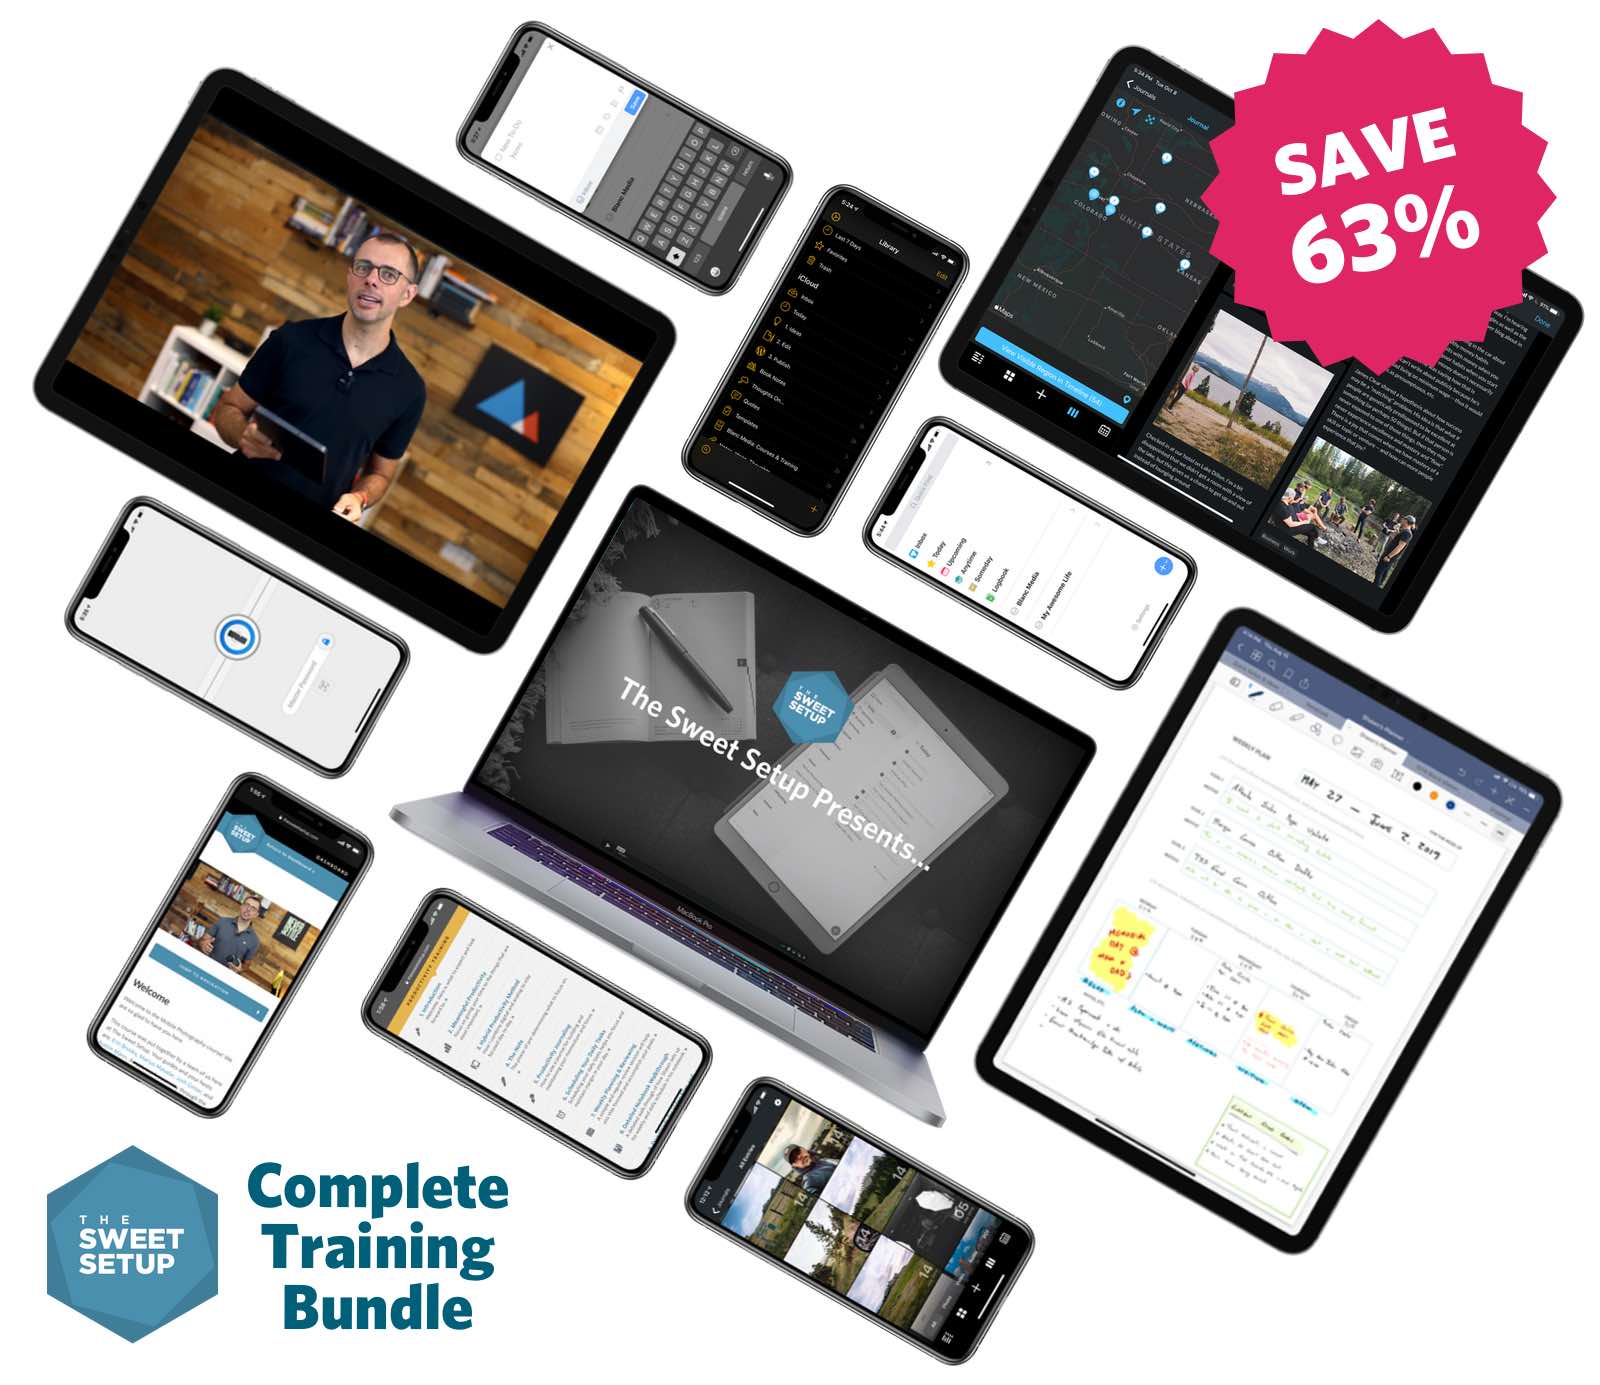 Save 63% (a $171 discount) on all Courses in the Complete Training Bundle